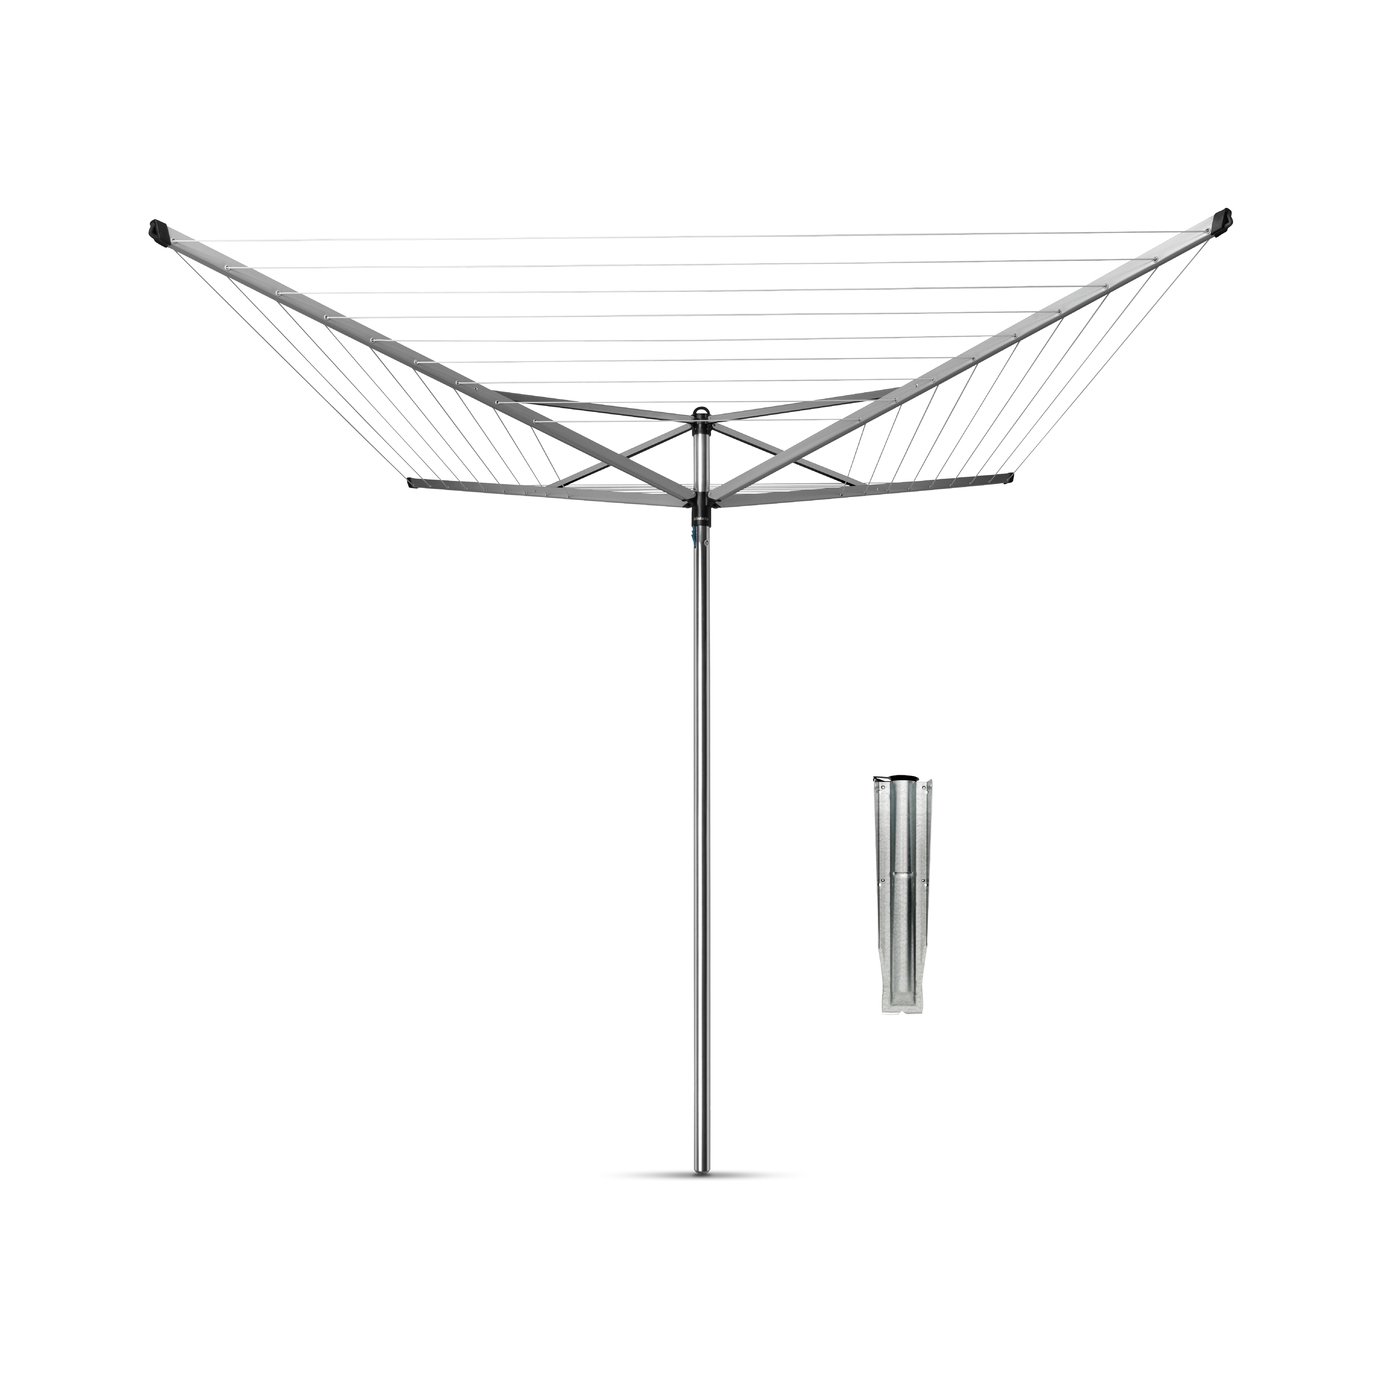 Brabantia 50m Topspinner Washing Line with Ground Spike